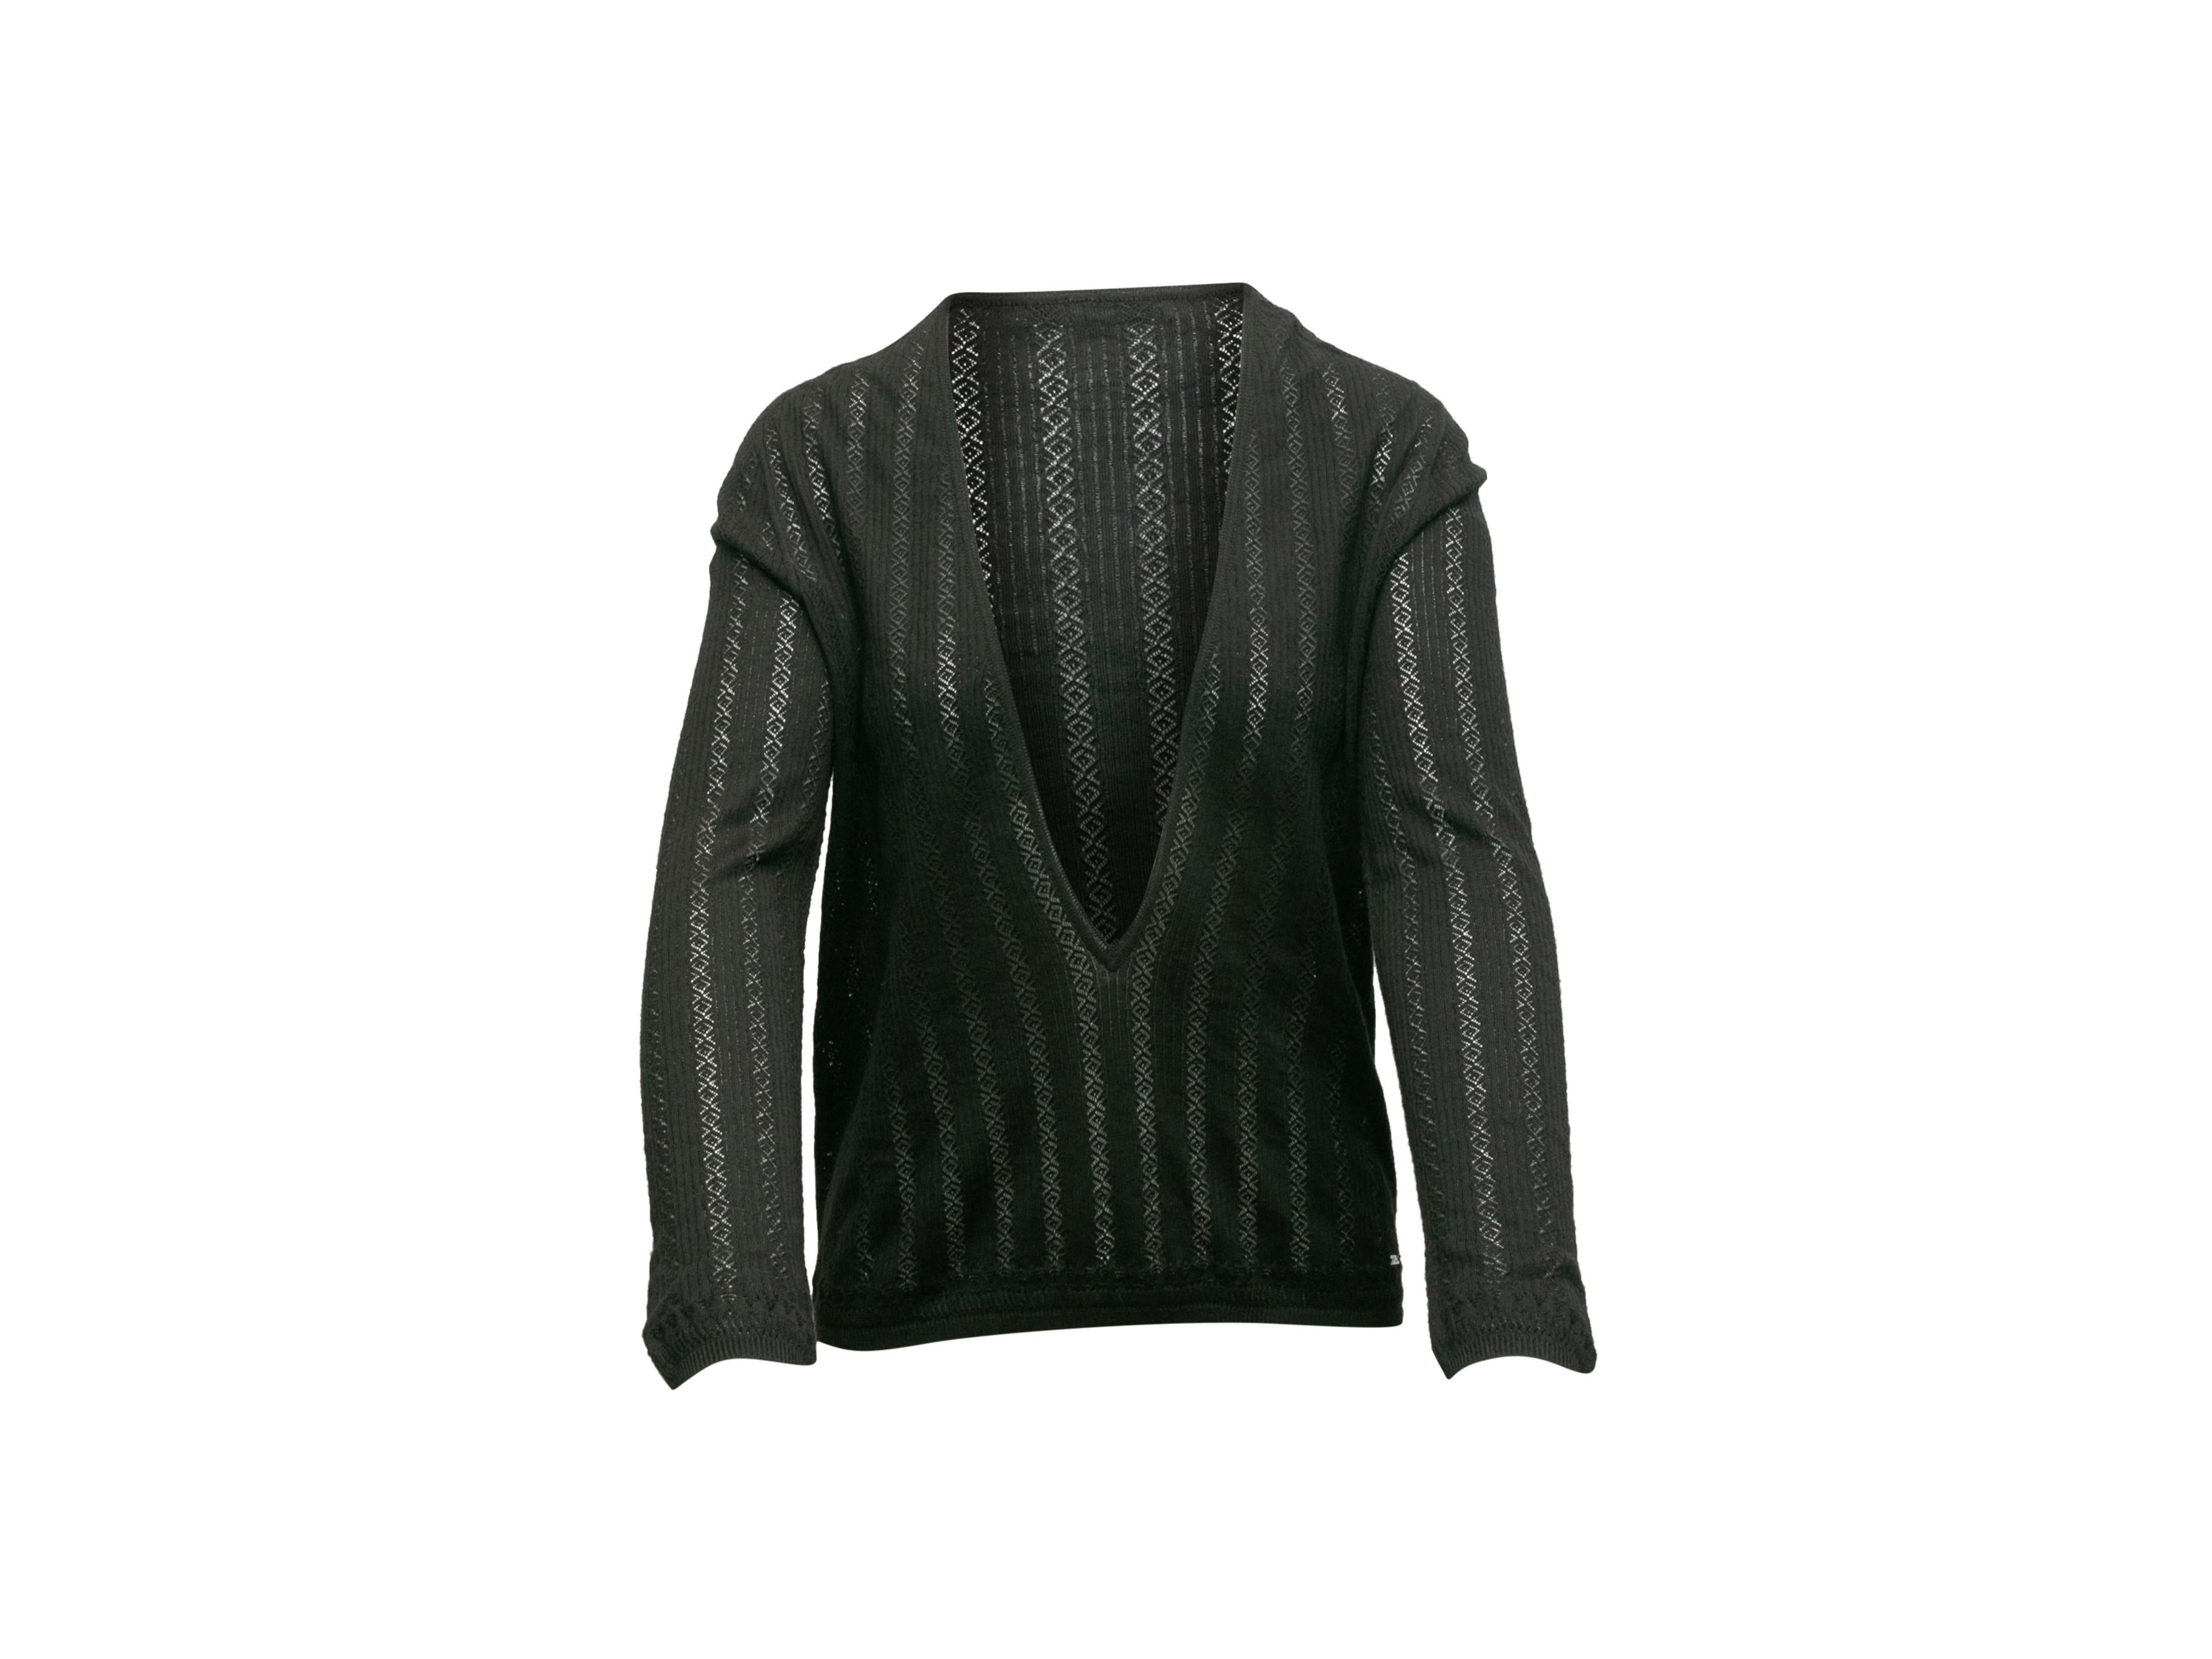 christian dior knit top